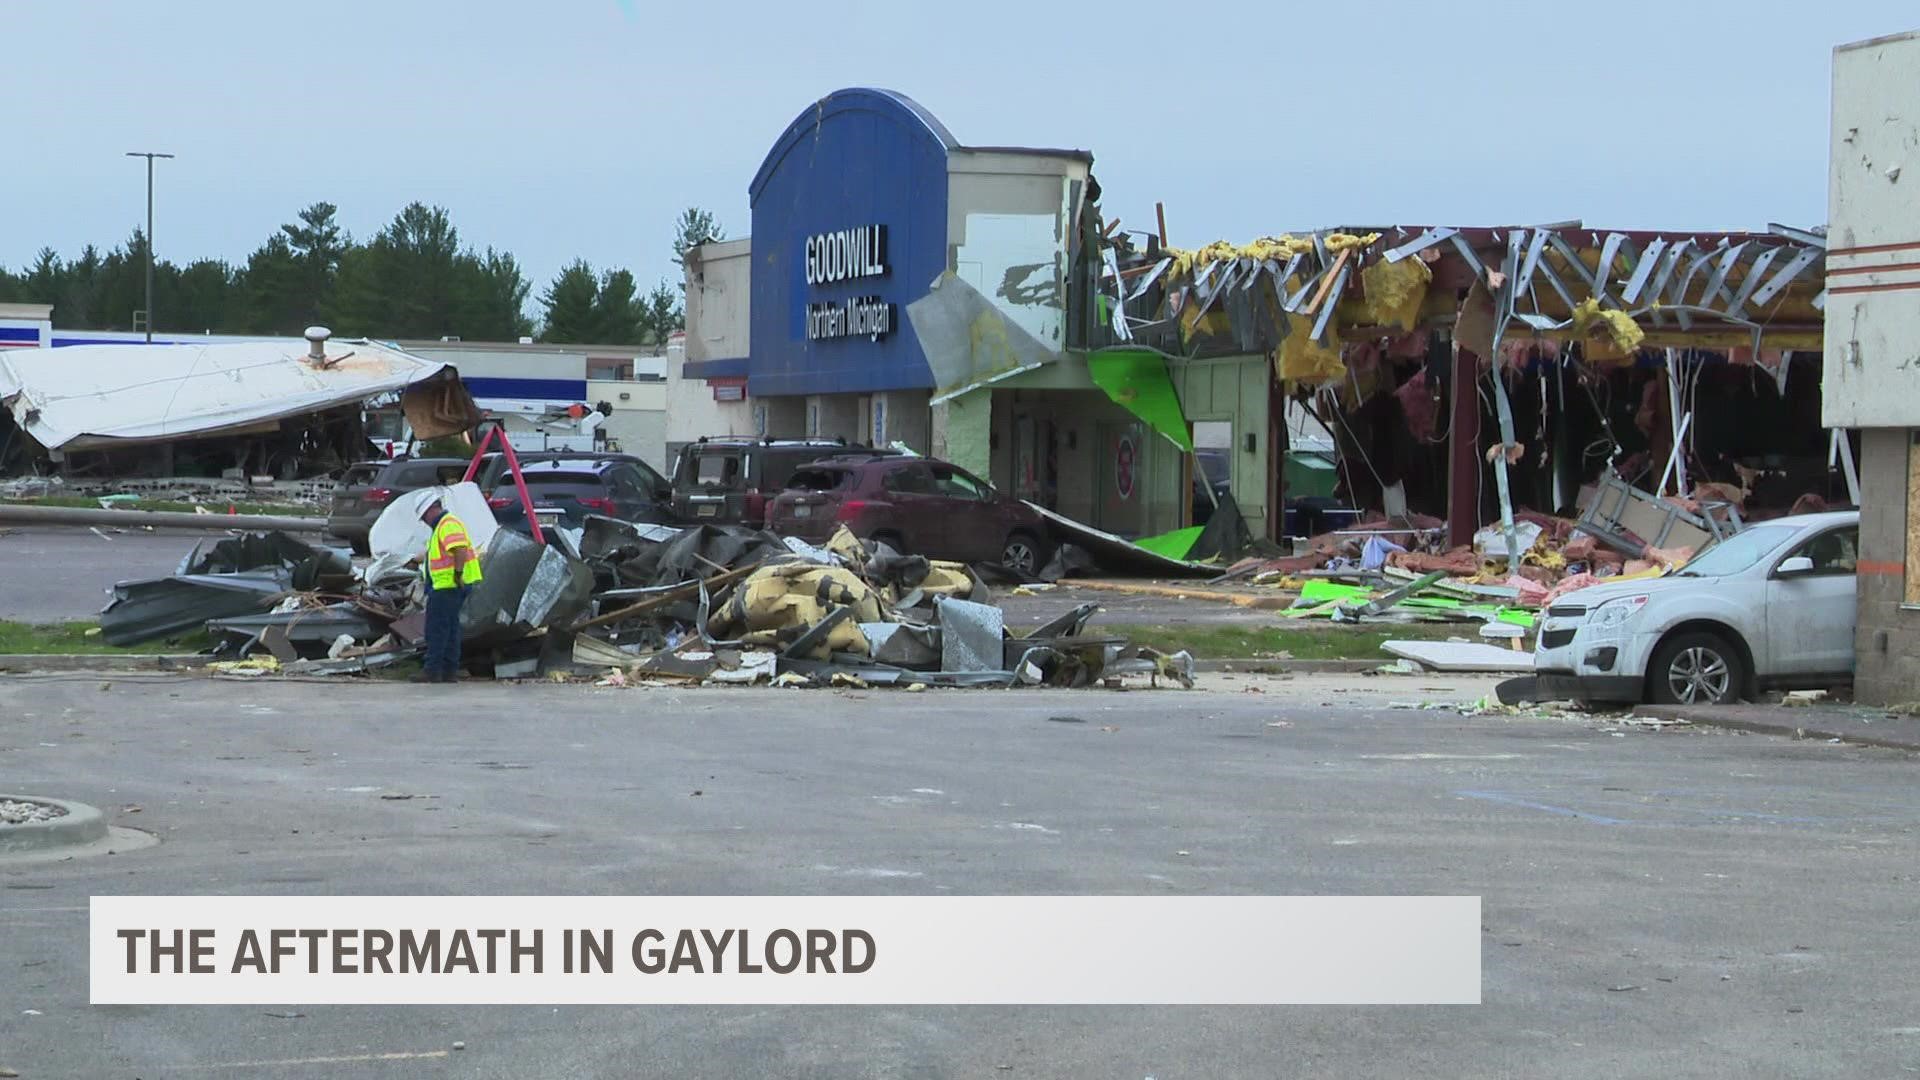 The morning after a twister tore through Gaylord, Michigan, the community is cleaning up while taking stock of the damage.